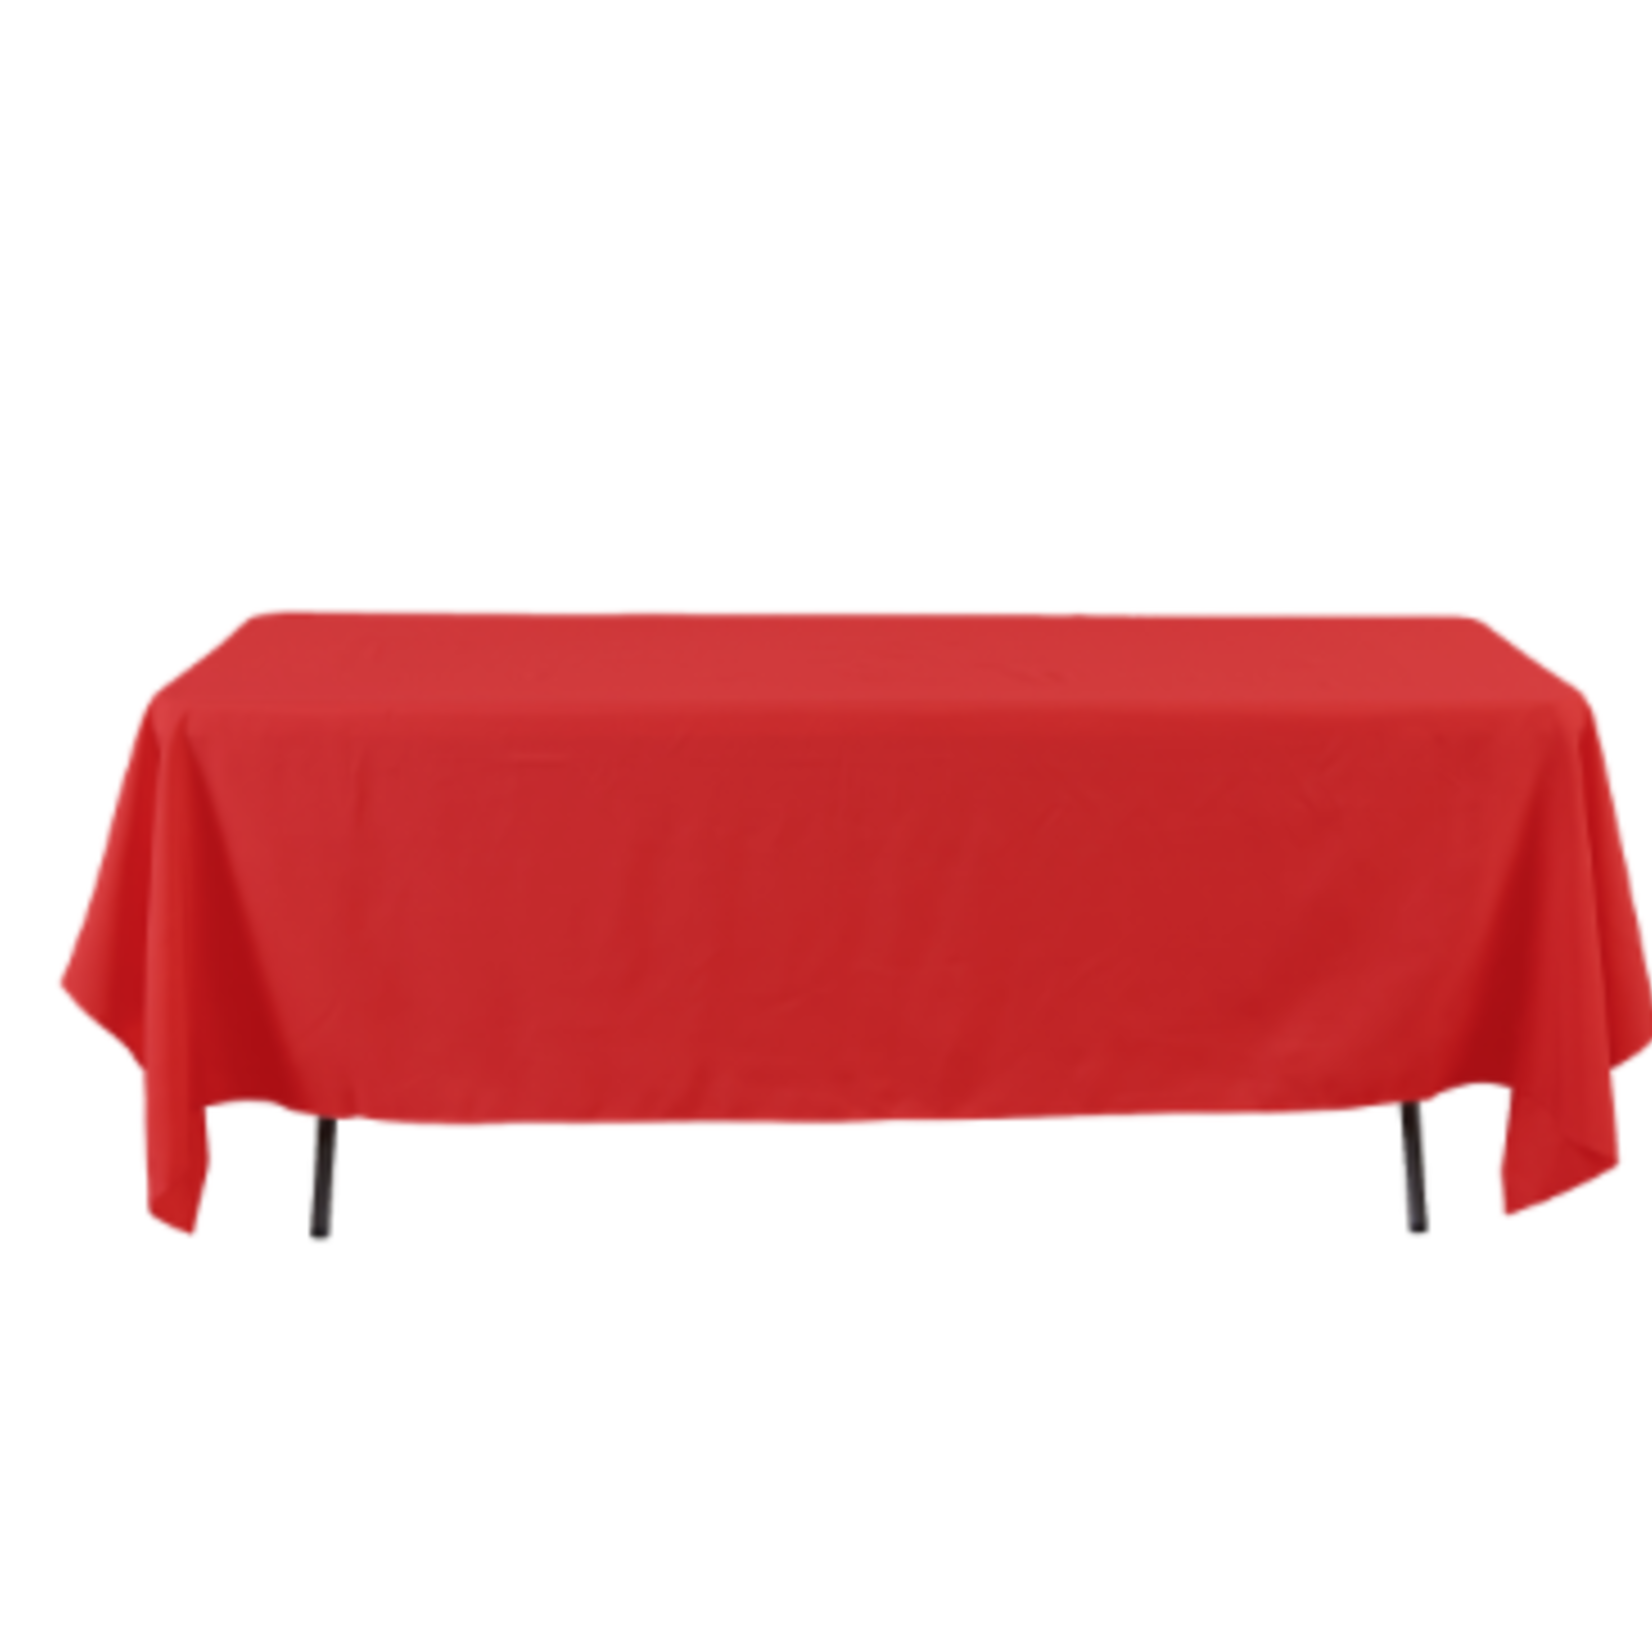 60" x 126" RED, RECTANGULAR TABLE COVER 38-0025rd